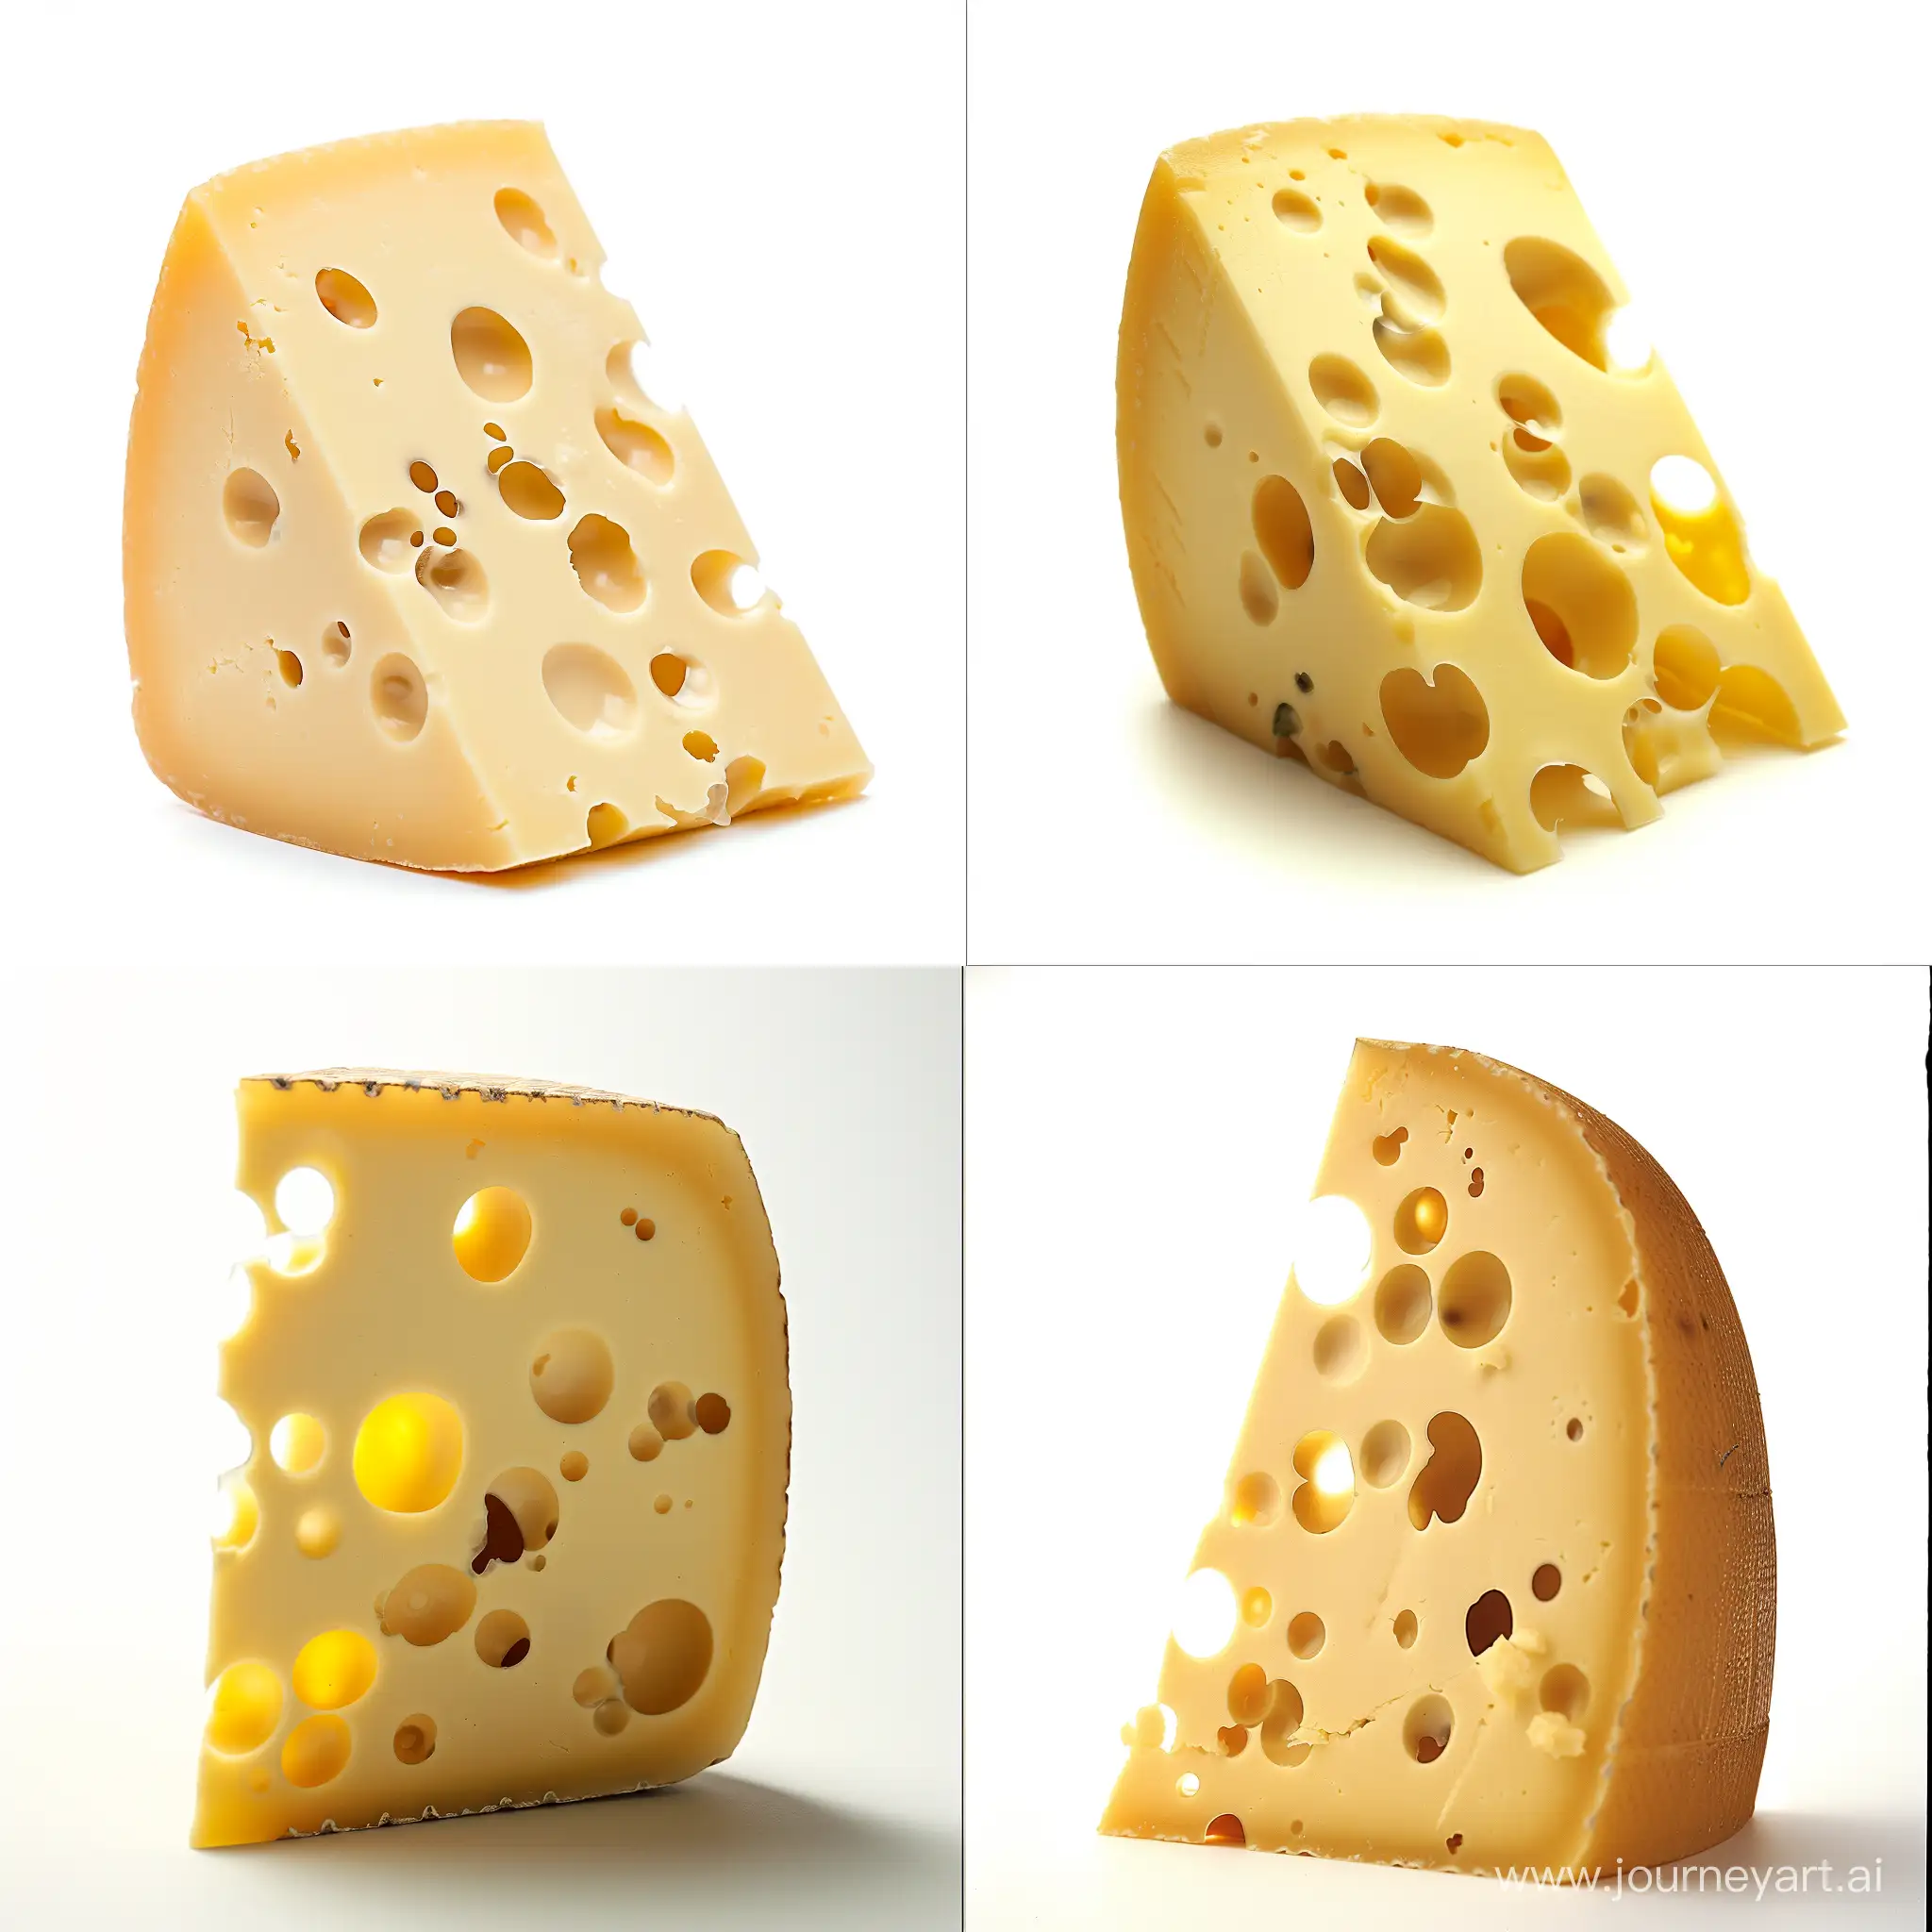 Cheese-with-Holes-Photorealistic-Studio-Shot-with-Canon-DSLR-and-Micro-Lens